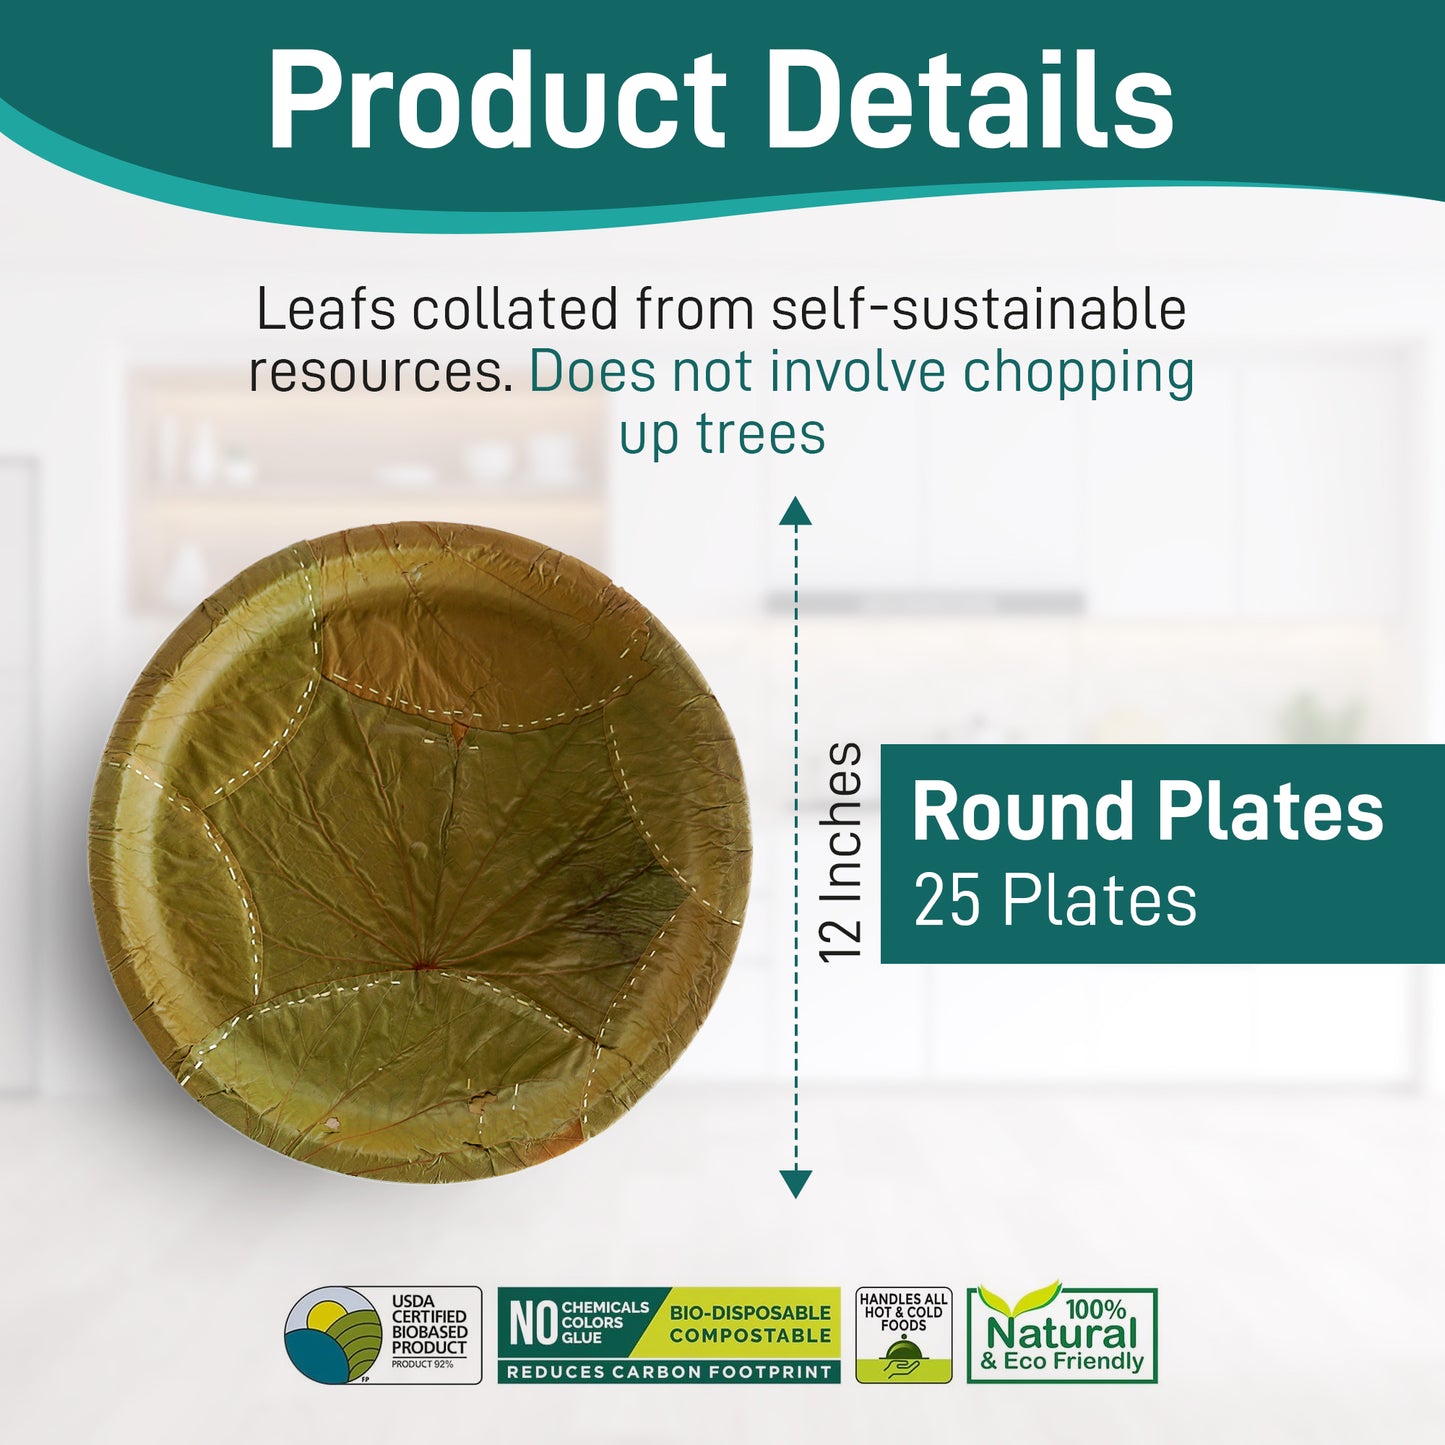 Eco-Friendly Vistaraku Leaf Plate Set - Siali (Bauhinia vahlii) and Palash Leaves | Biodegradable Disposable Plates for Parties, Weddings, BBQs & Traditional Events| Zero Waste | 12-inch Size | Pack of 25